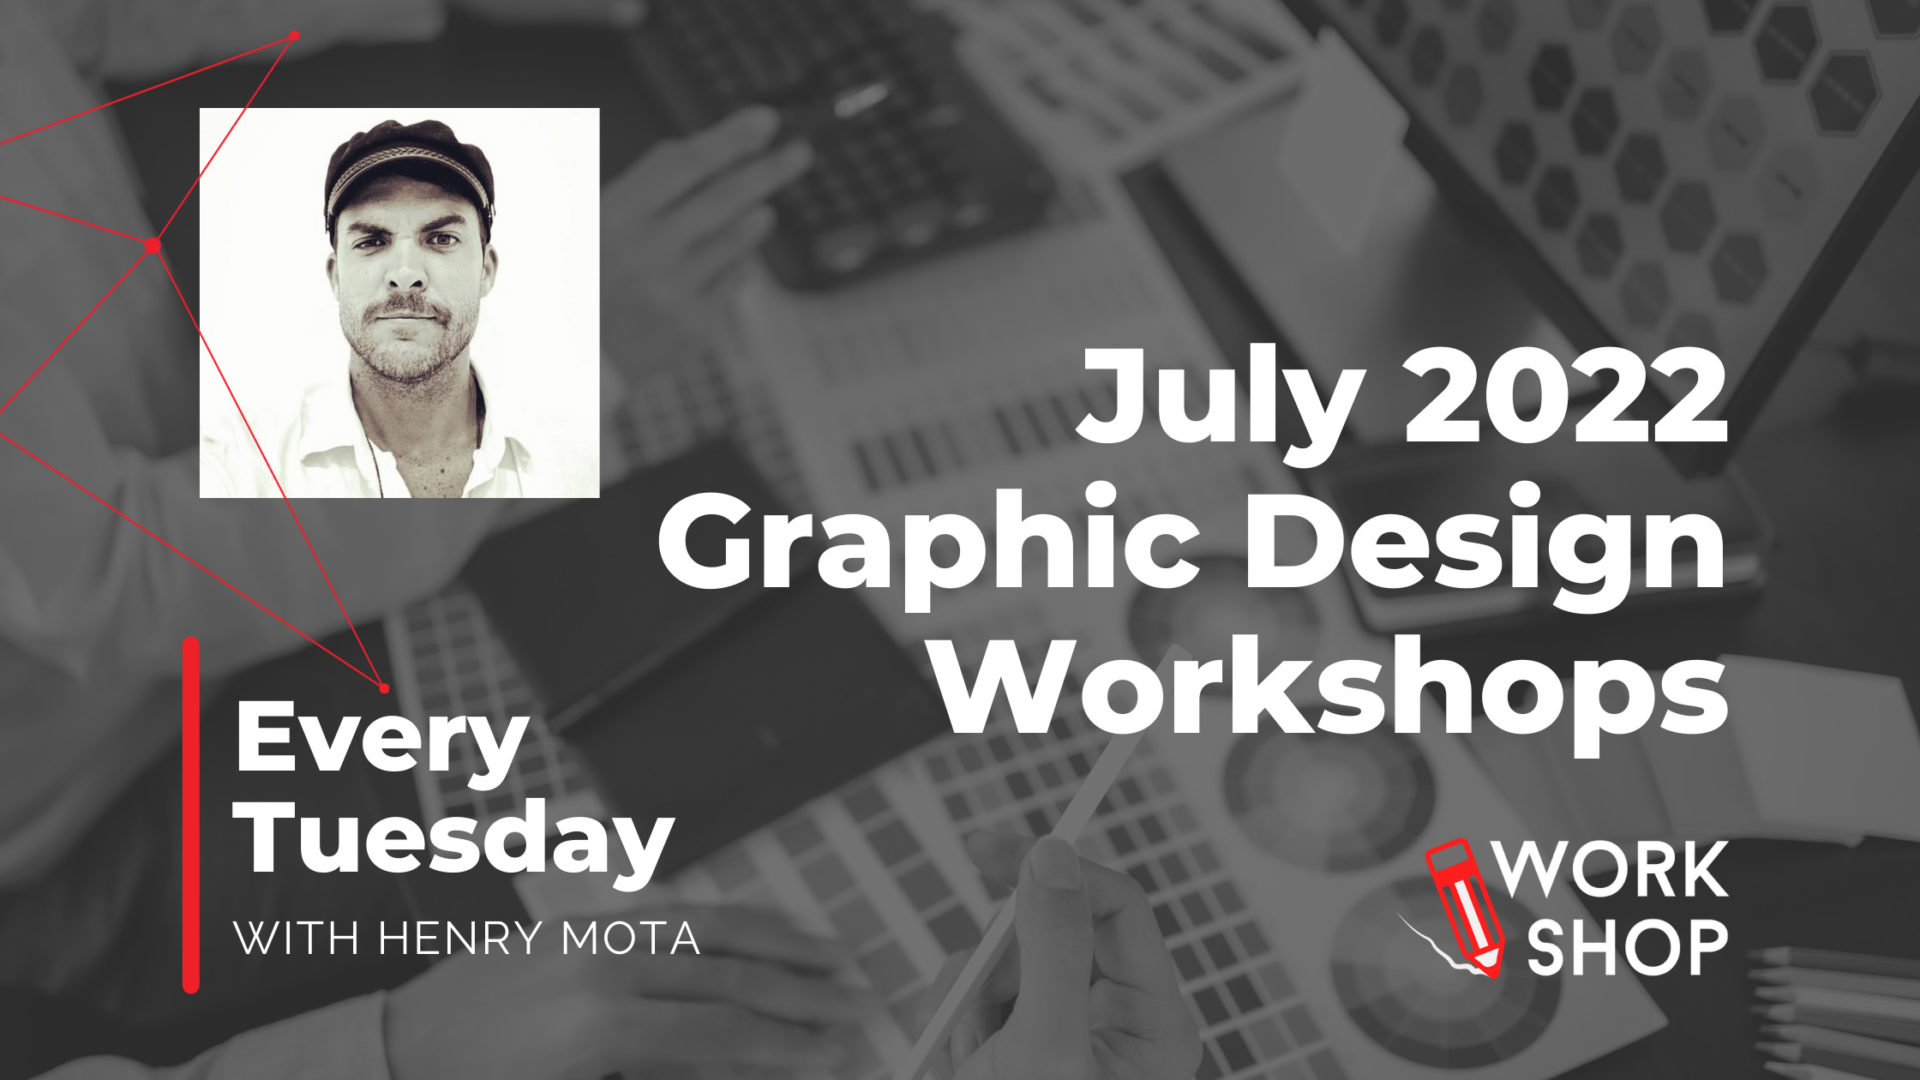 Level-up Your Design Skills with our July Graphic Design Workshops